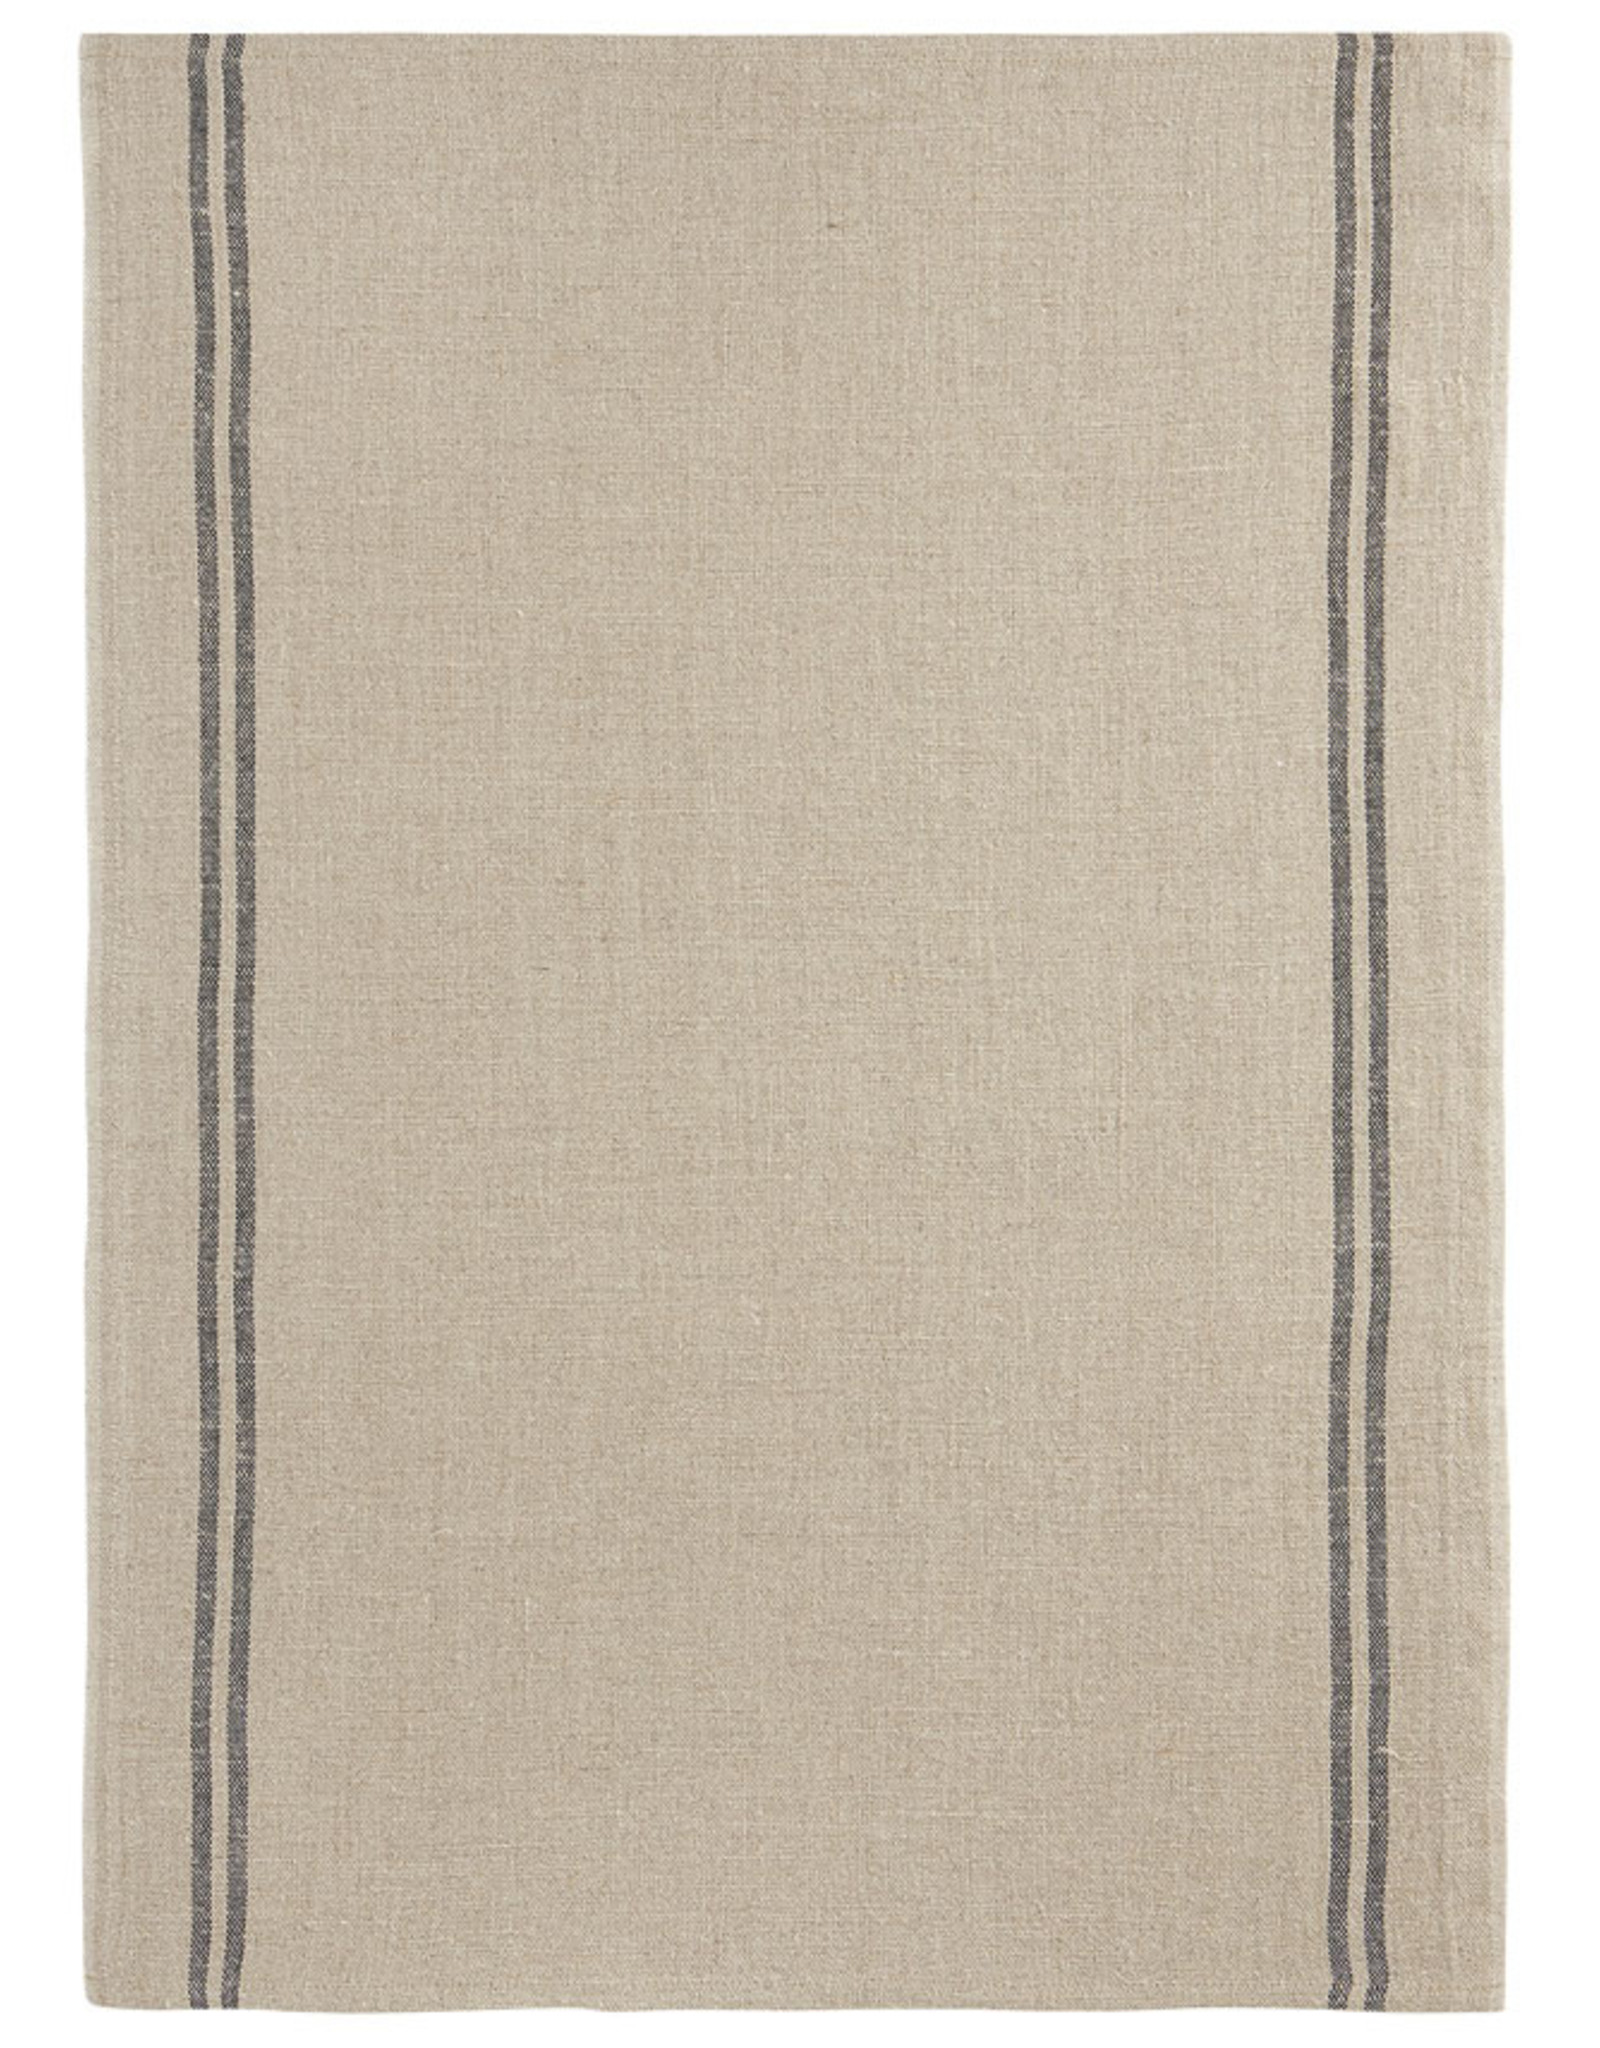 Country Natural with Black Stripe Washed Linen Tea Towel